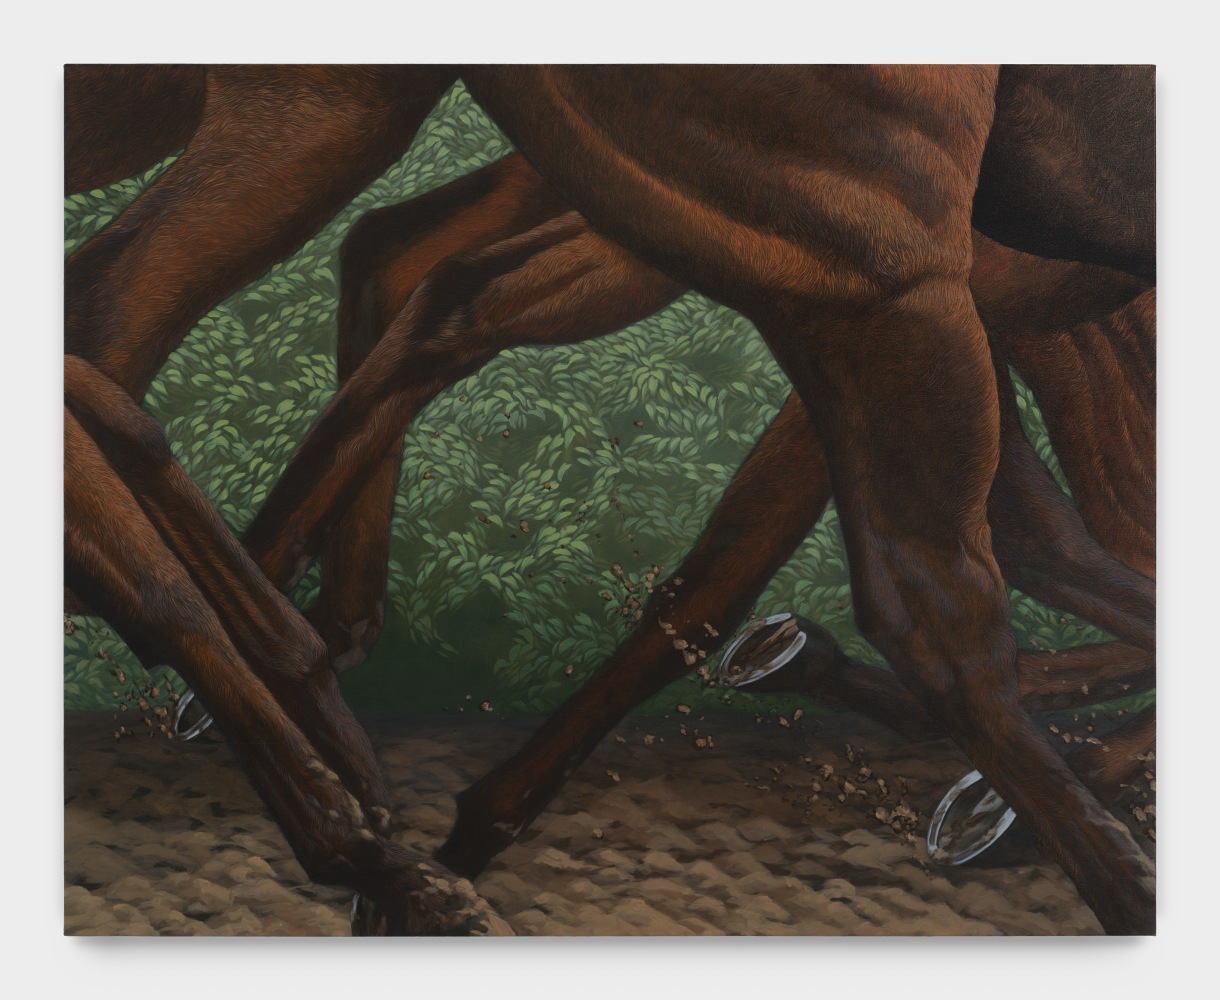 A painting depicting the legs of multiple brown horses running through splashing mud with shrubbery in the background.